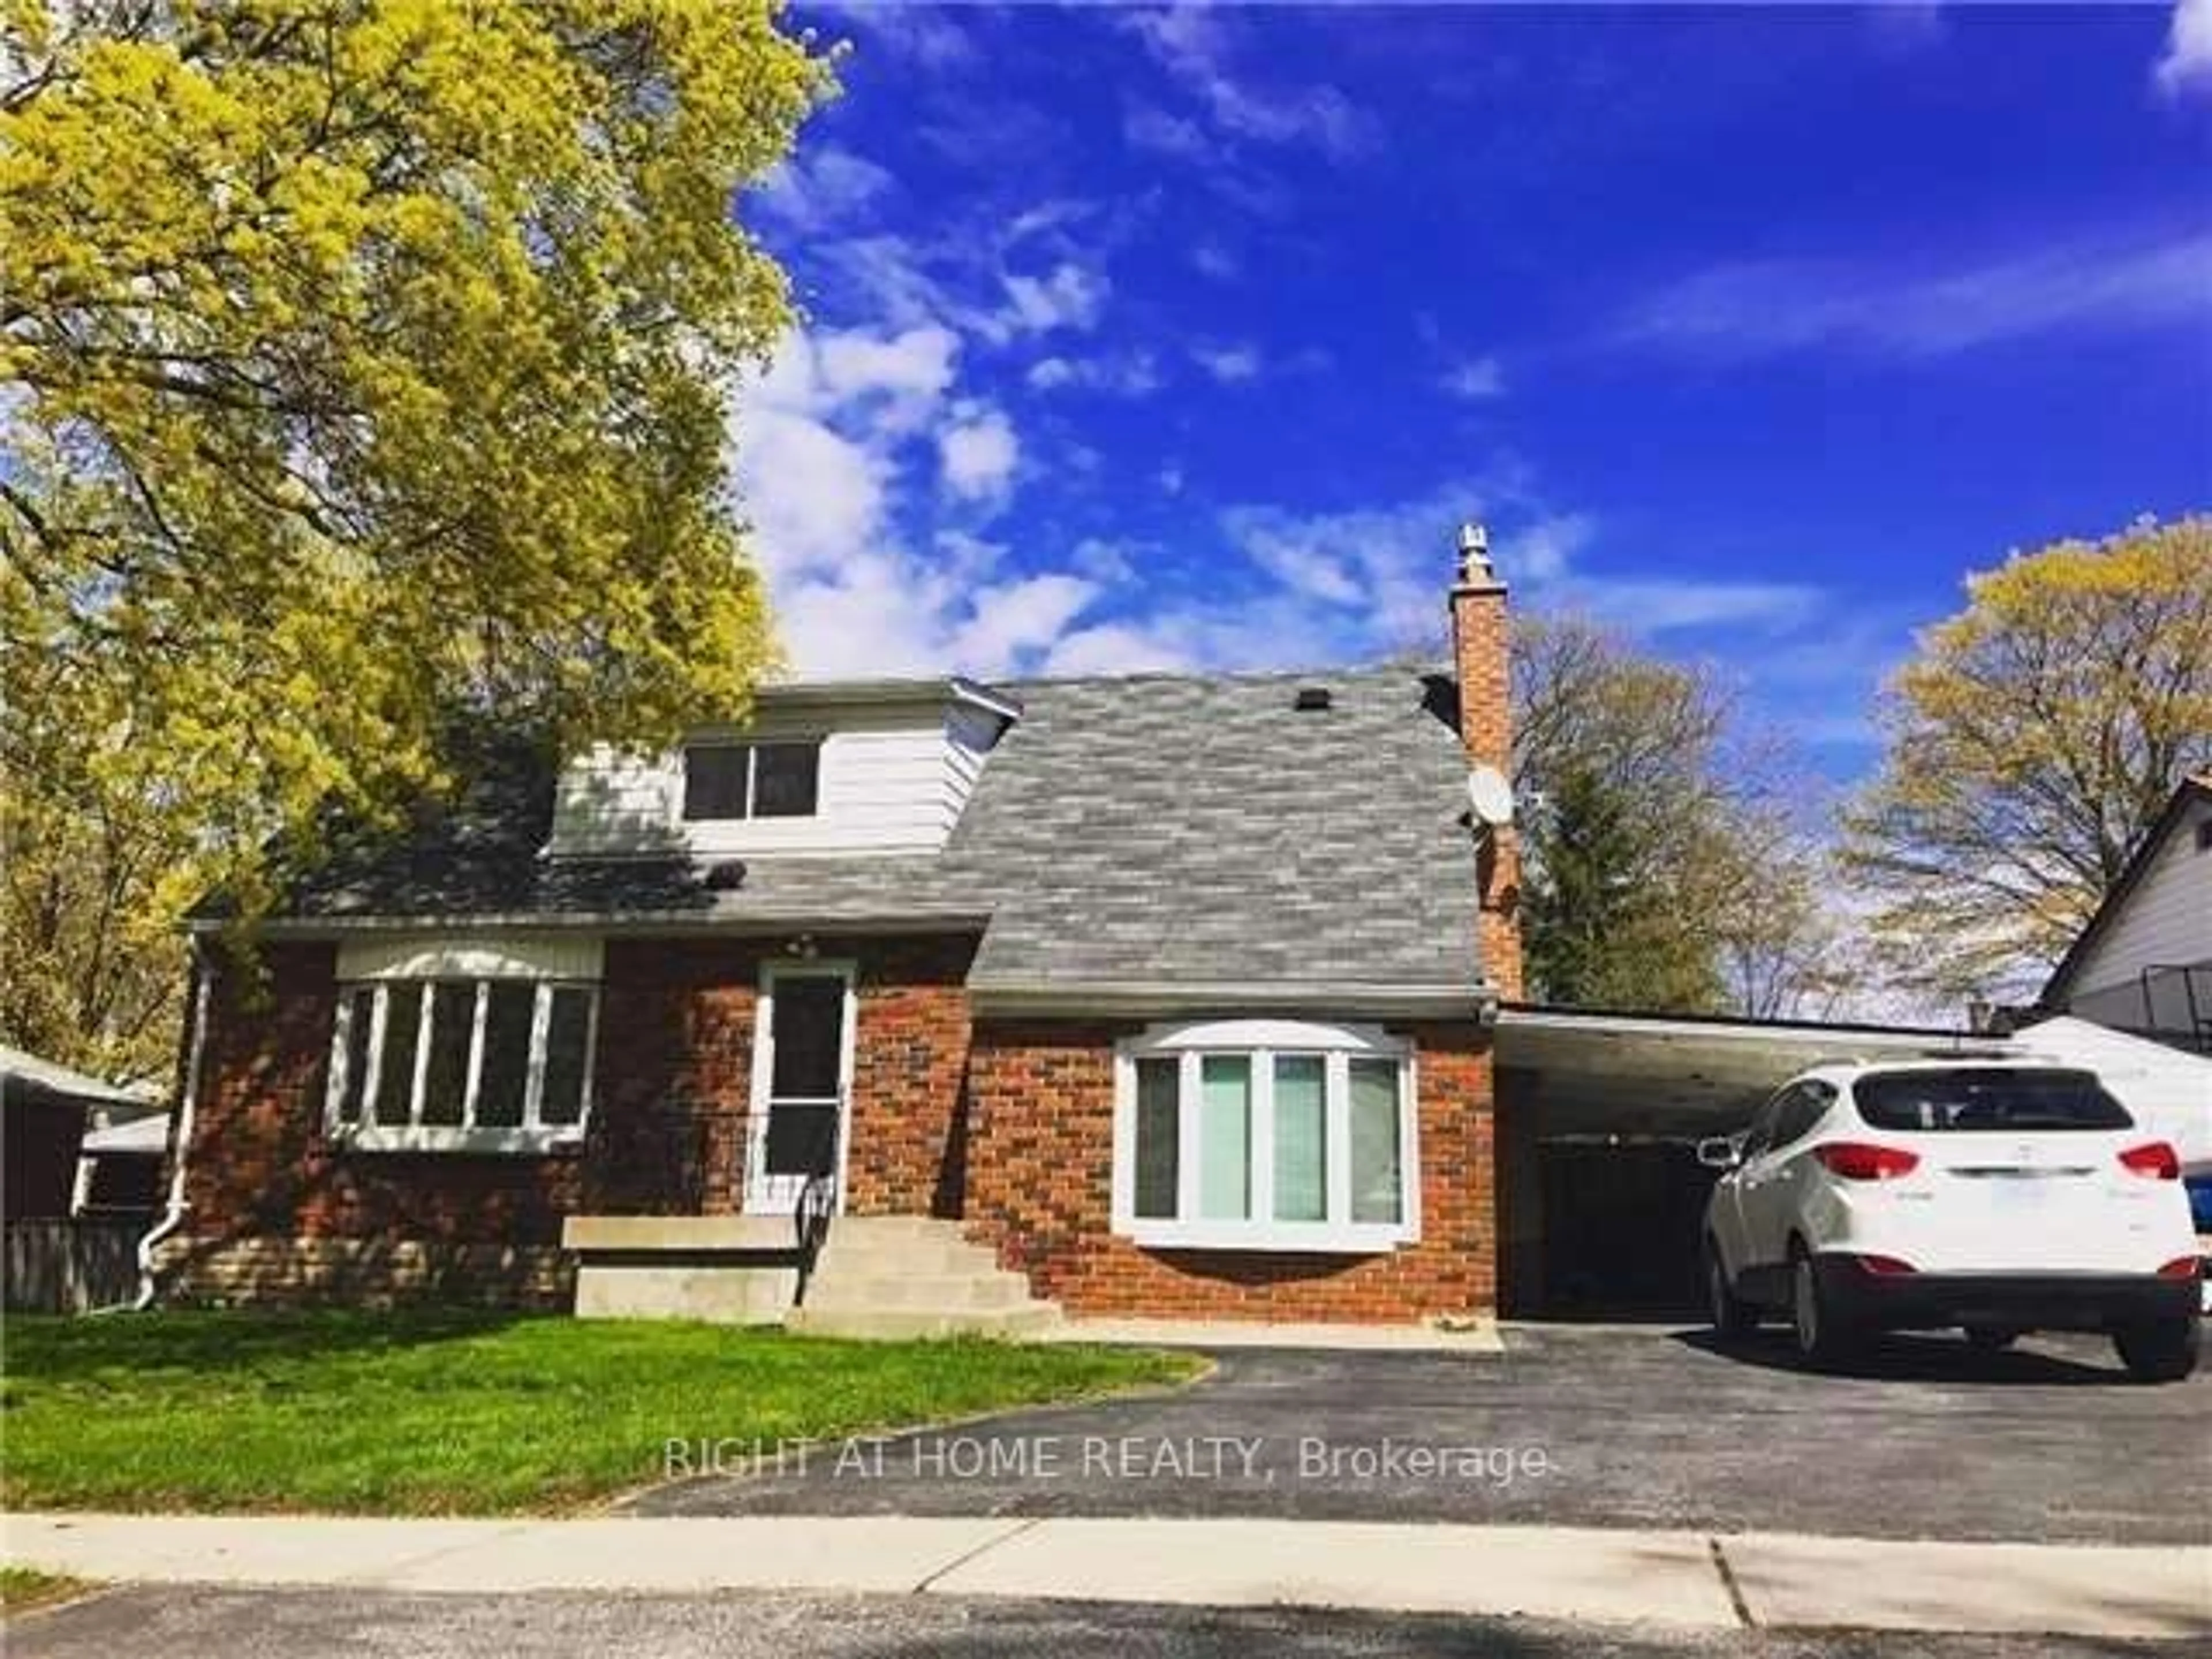 Frontside or backside of a home for 83 Lundy's Lane, Newmarket Ontario L3Y 3R9